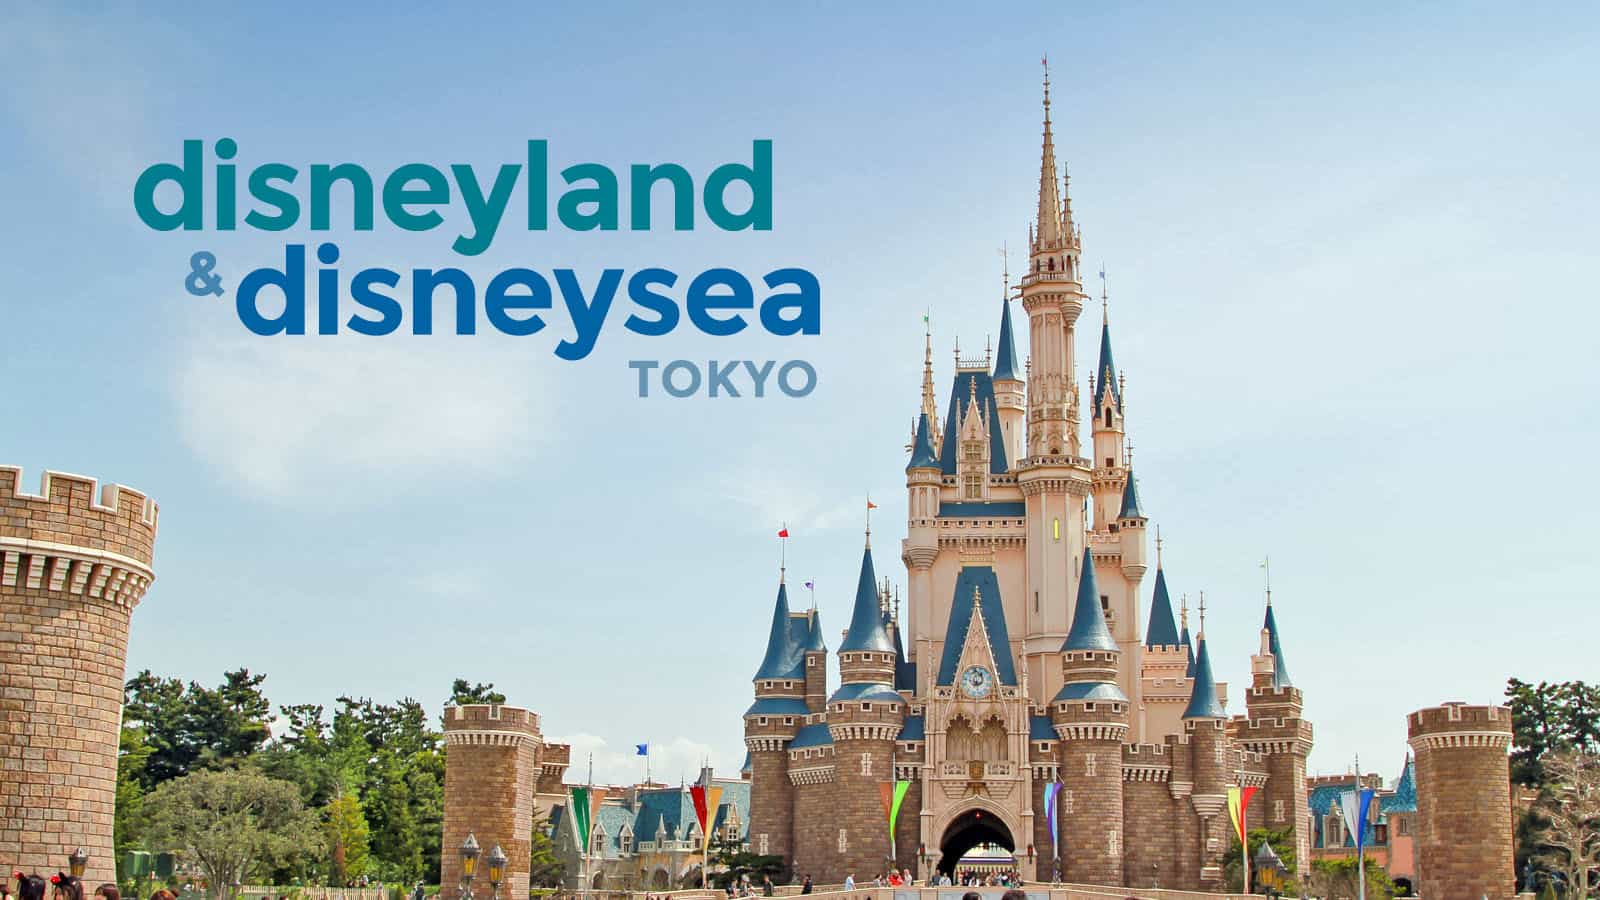 tokyo-disneyland-disneysea-guide-for-first-timers-the-poor